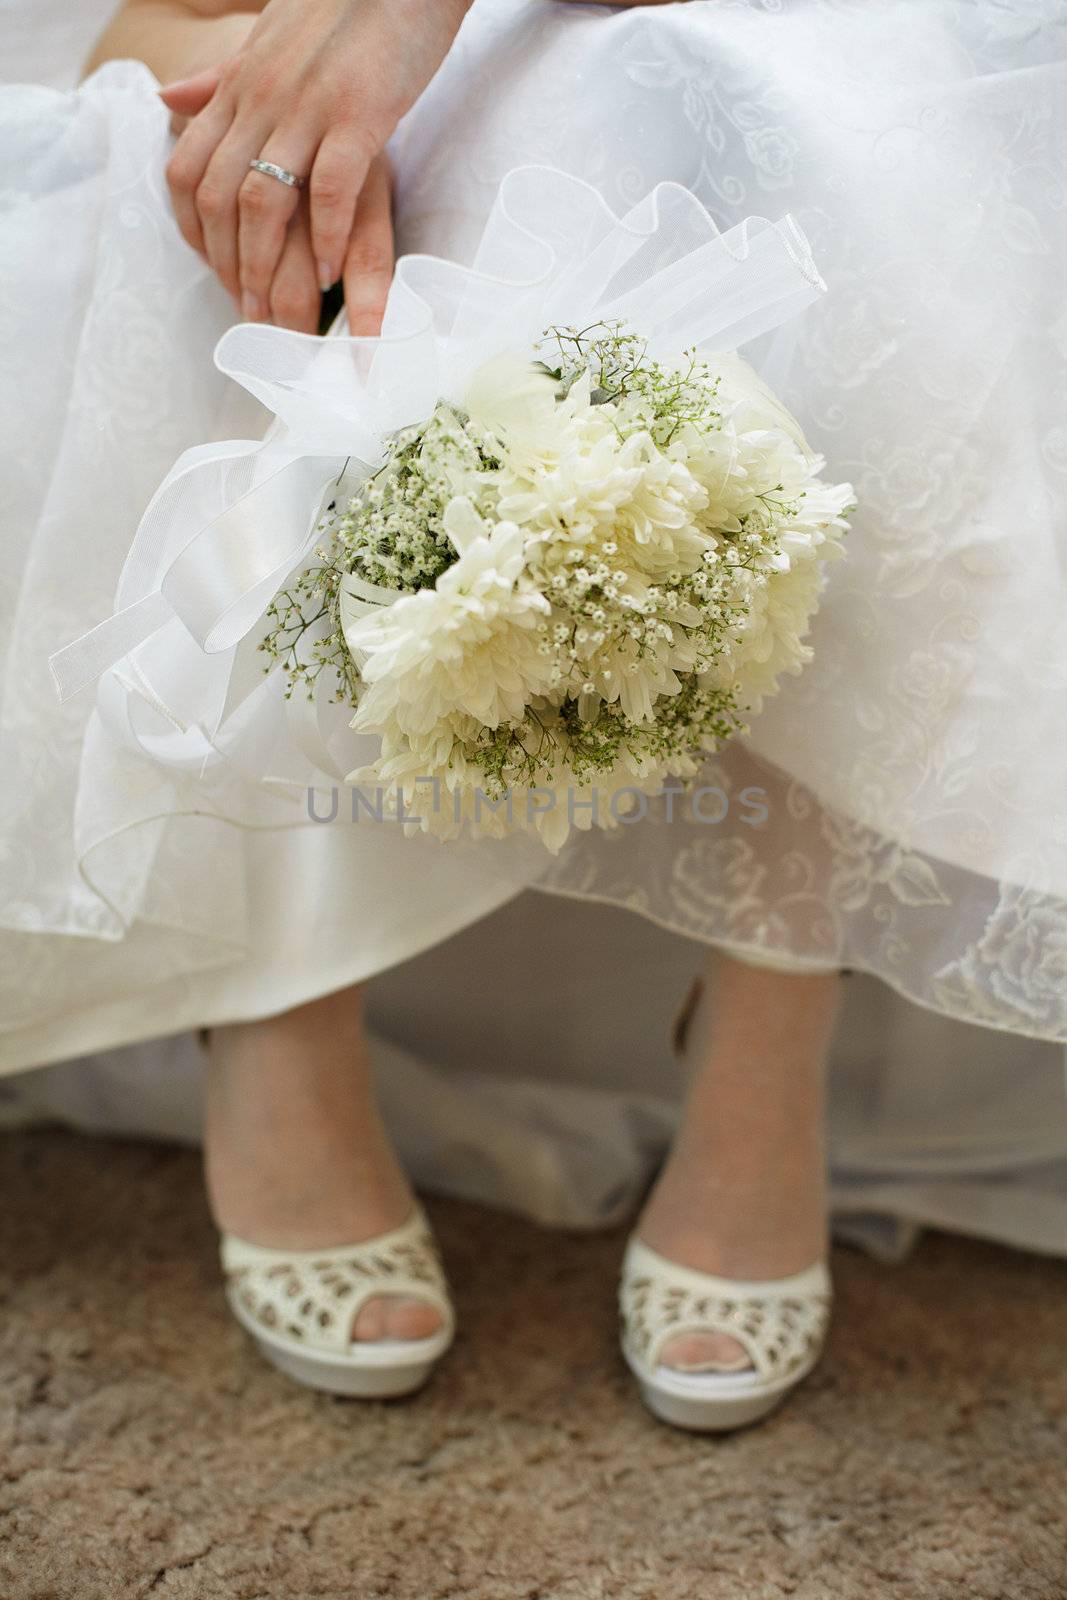 Bouquet of the bride against a dress and shoes